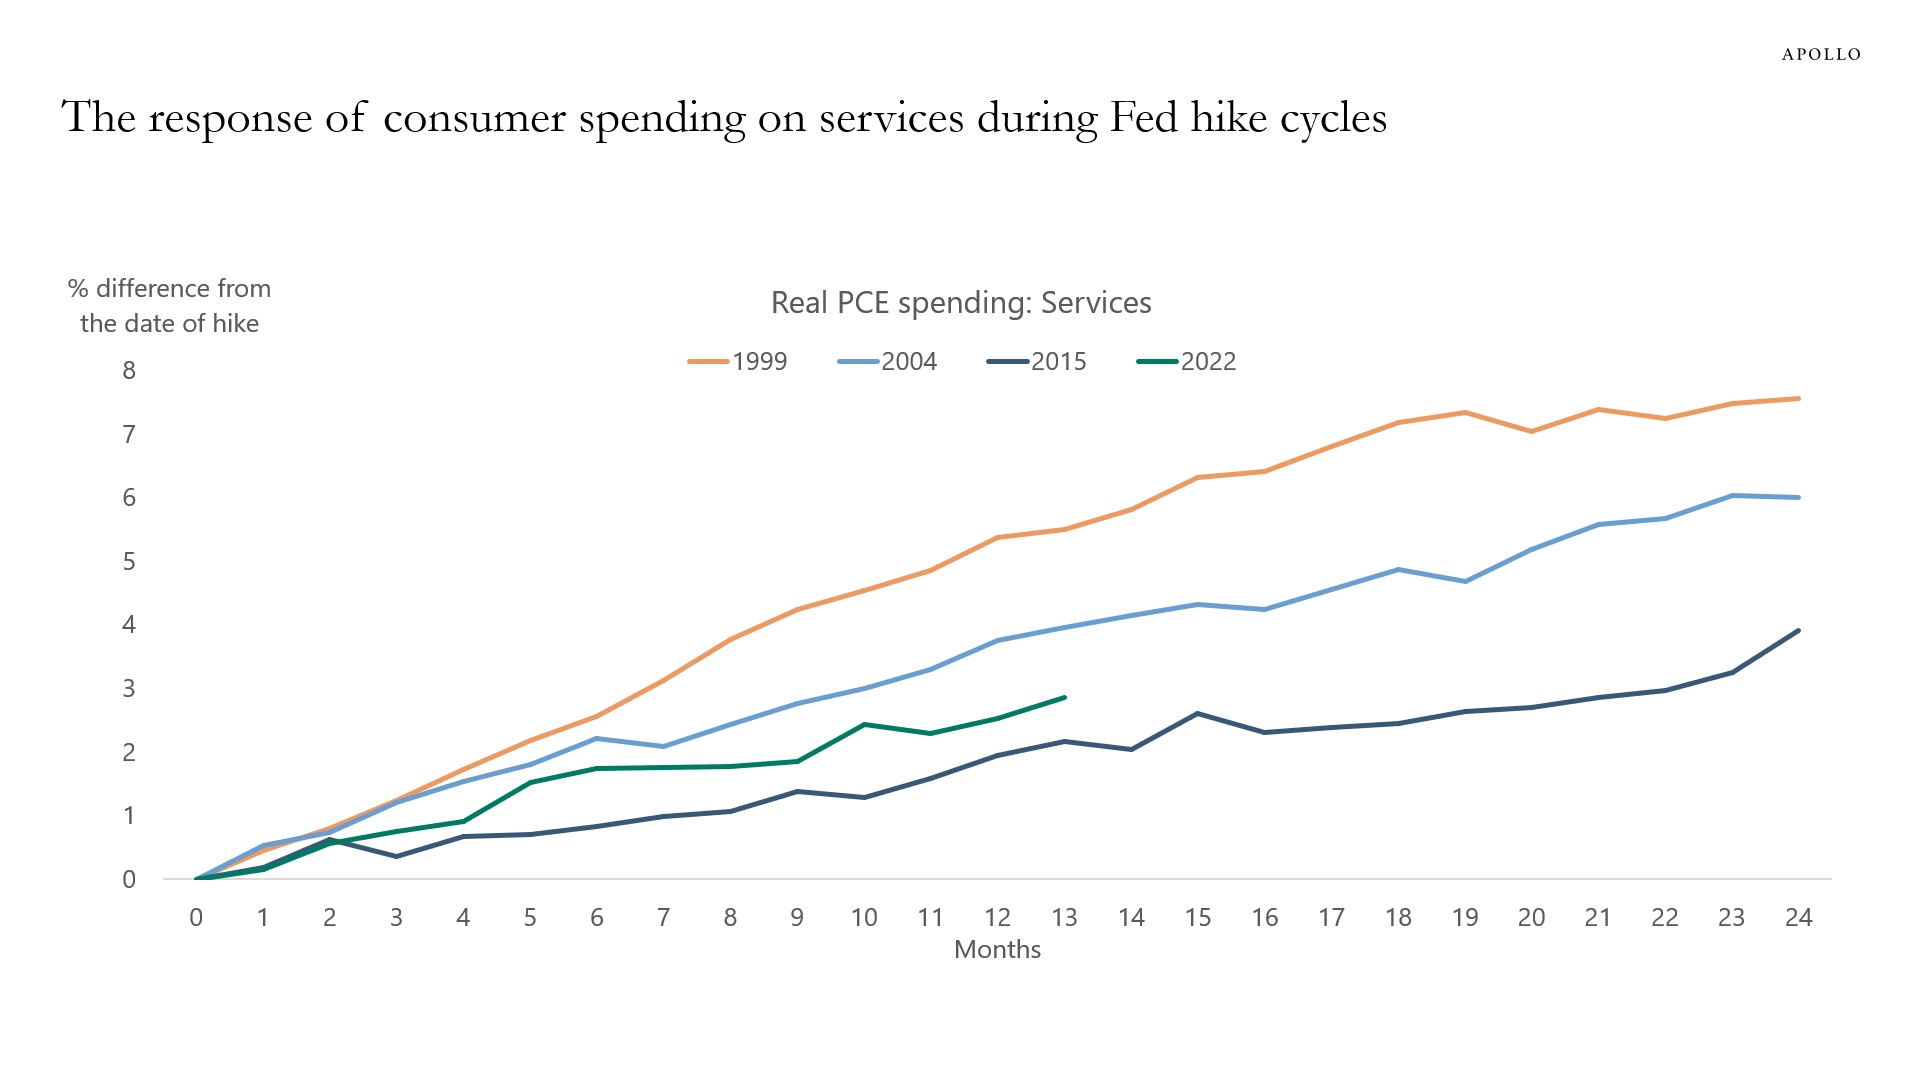 Response of services spending during Fed rate hikes